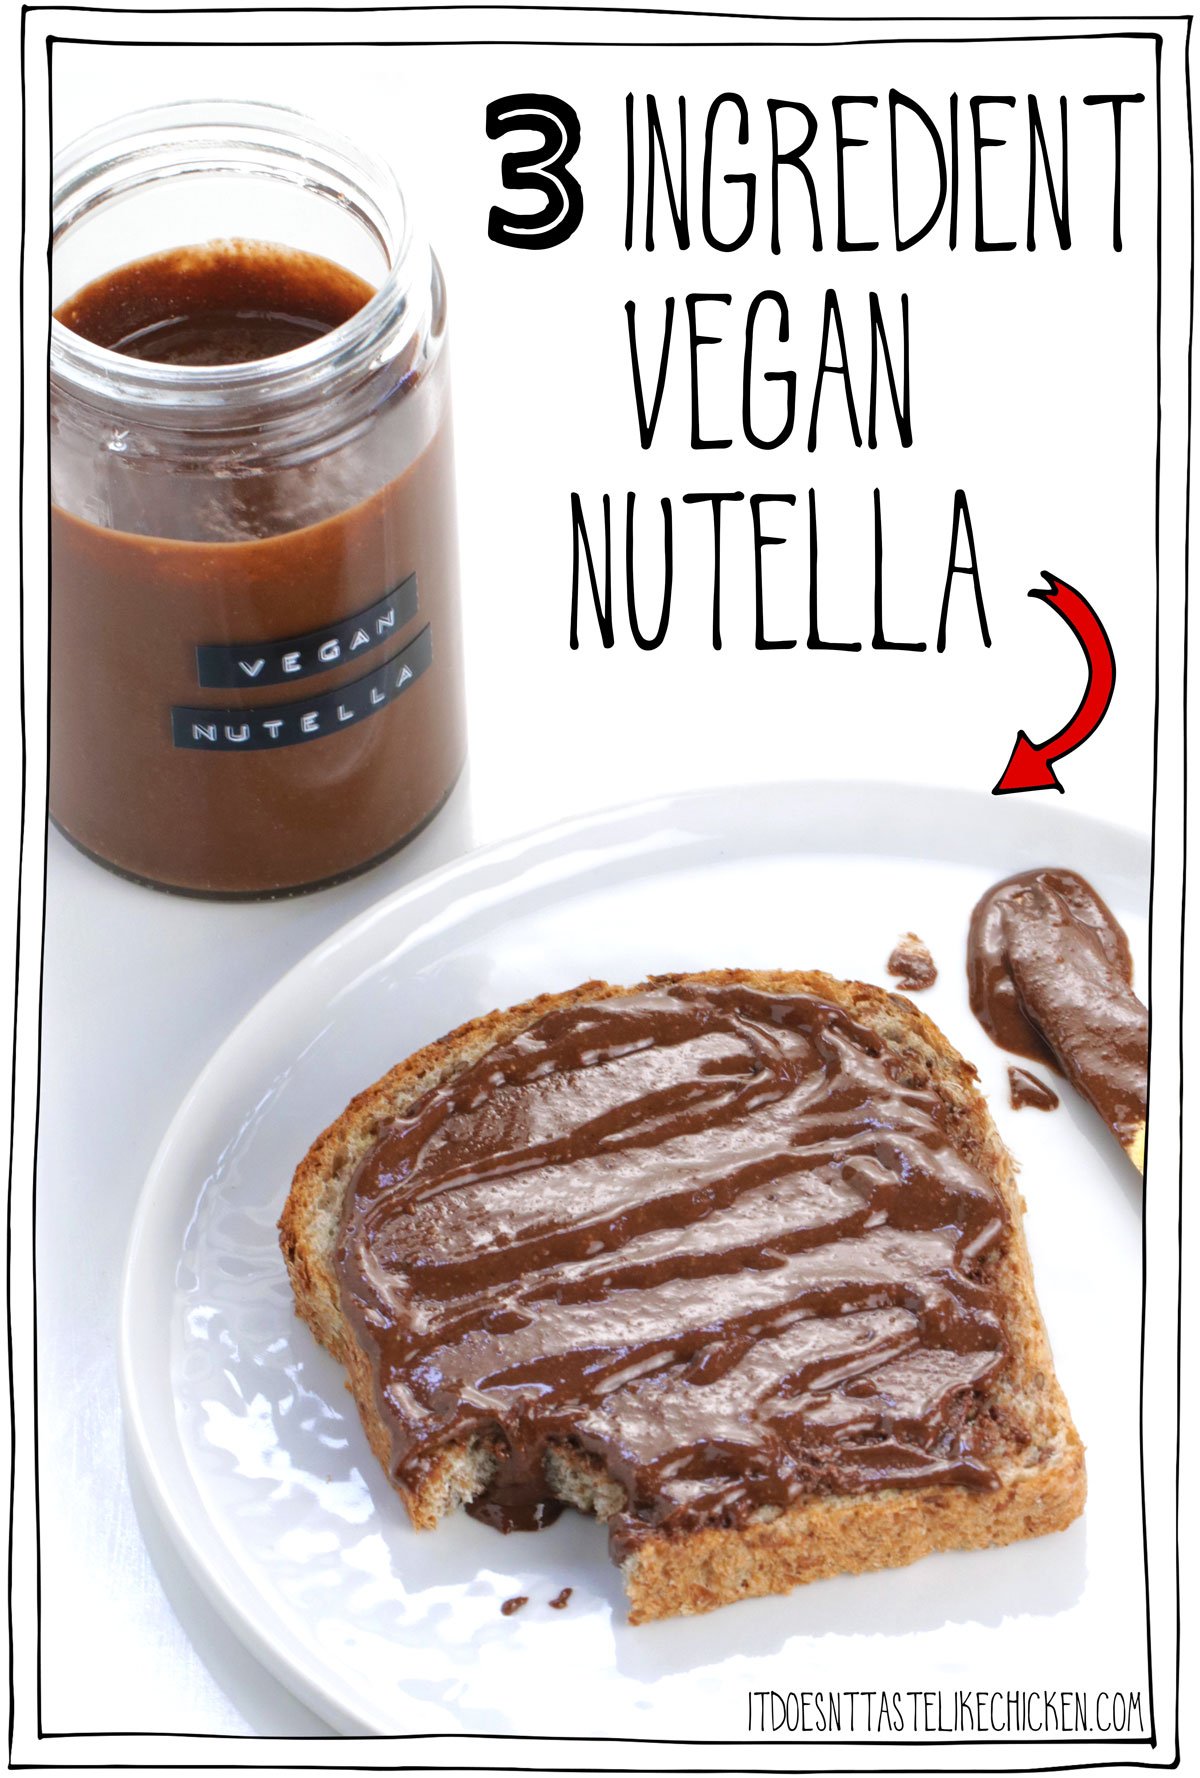 The best homemade vegan Nutella recipe is here!! Just 3 ingredients and 15 minutes is all it takes to make the most amazing chocolate hazelnut spread that tastes just like the real thing, except better! Spread it on toast, use it in baking, fill a vegan croissant, or just eat it off the spoon!